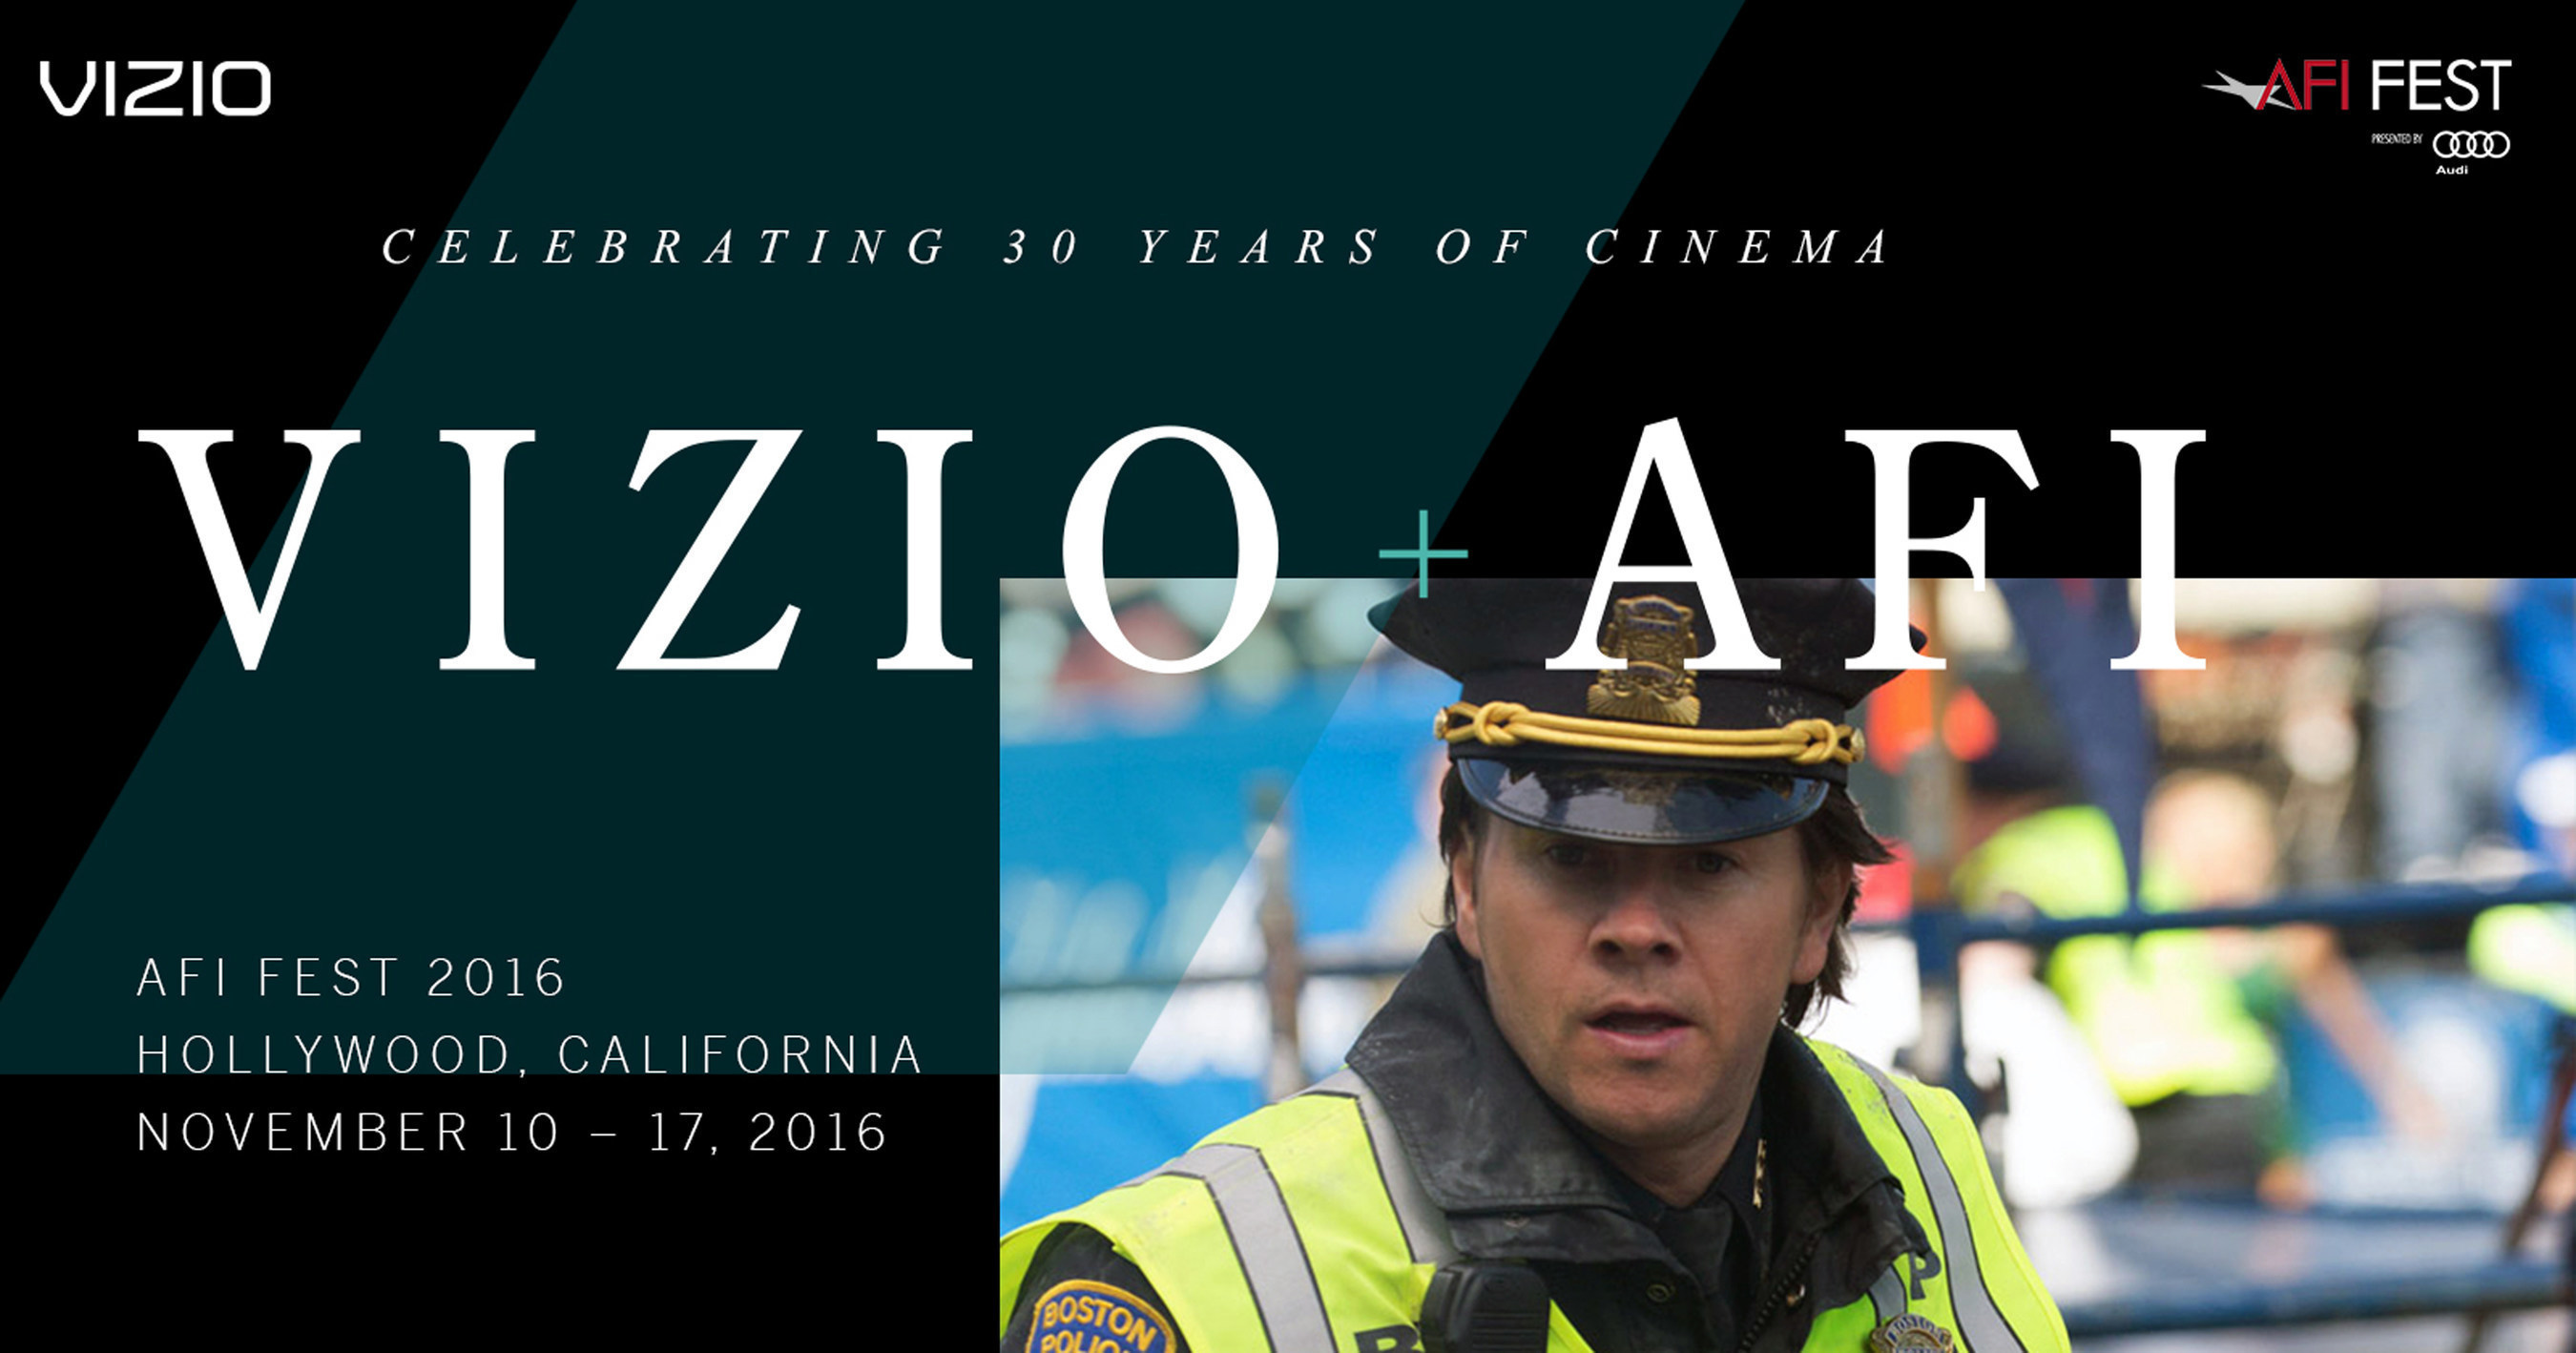 VIZIO and the American Film Institute Collaborate to Showcase the Intersection of Art and Technology at AFI FEST 2016